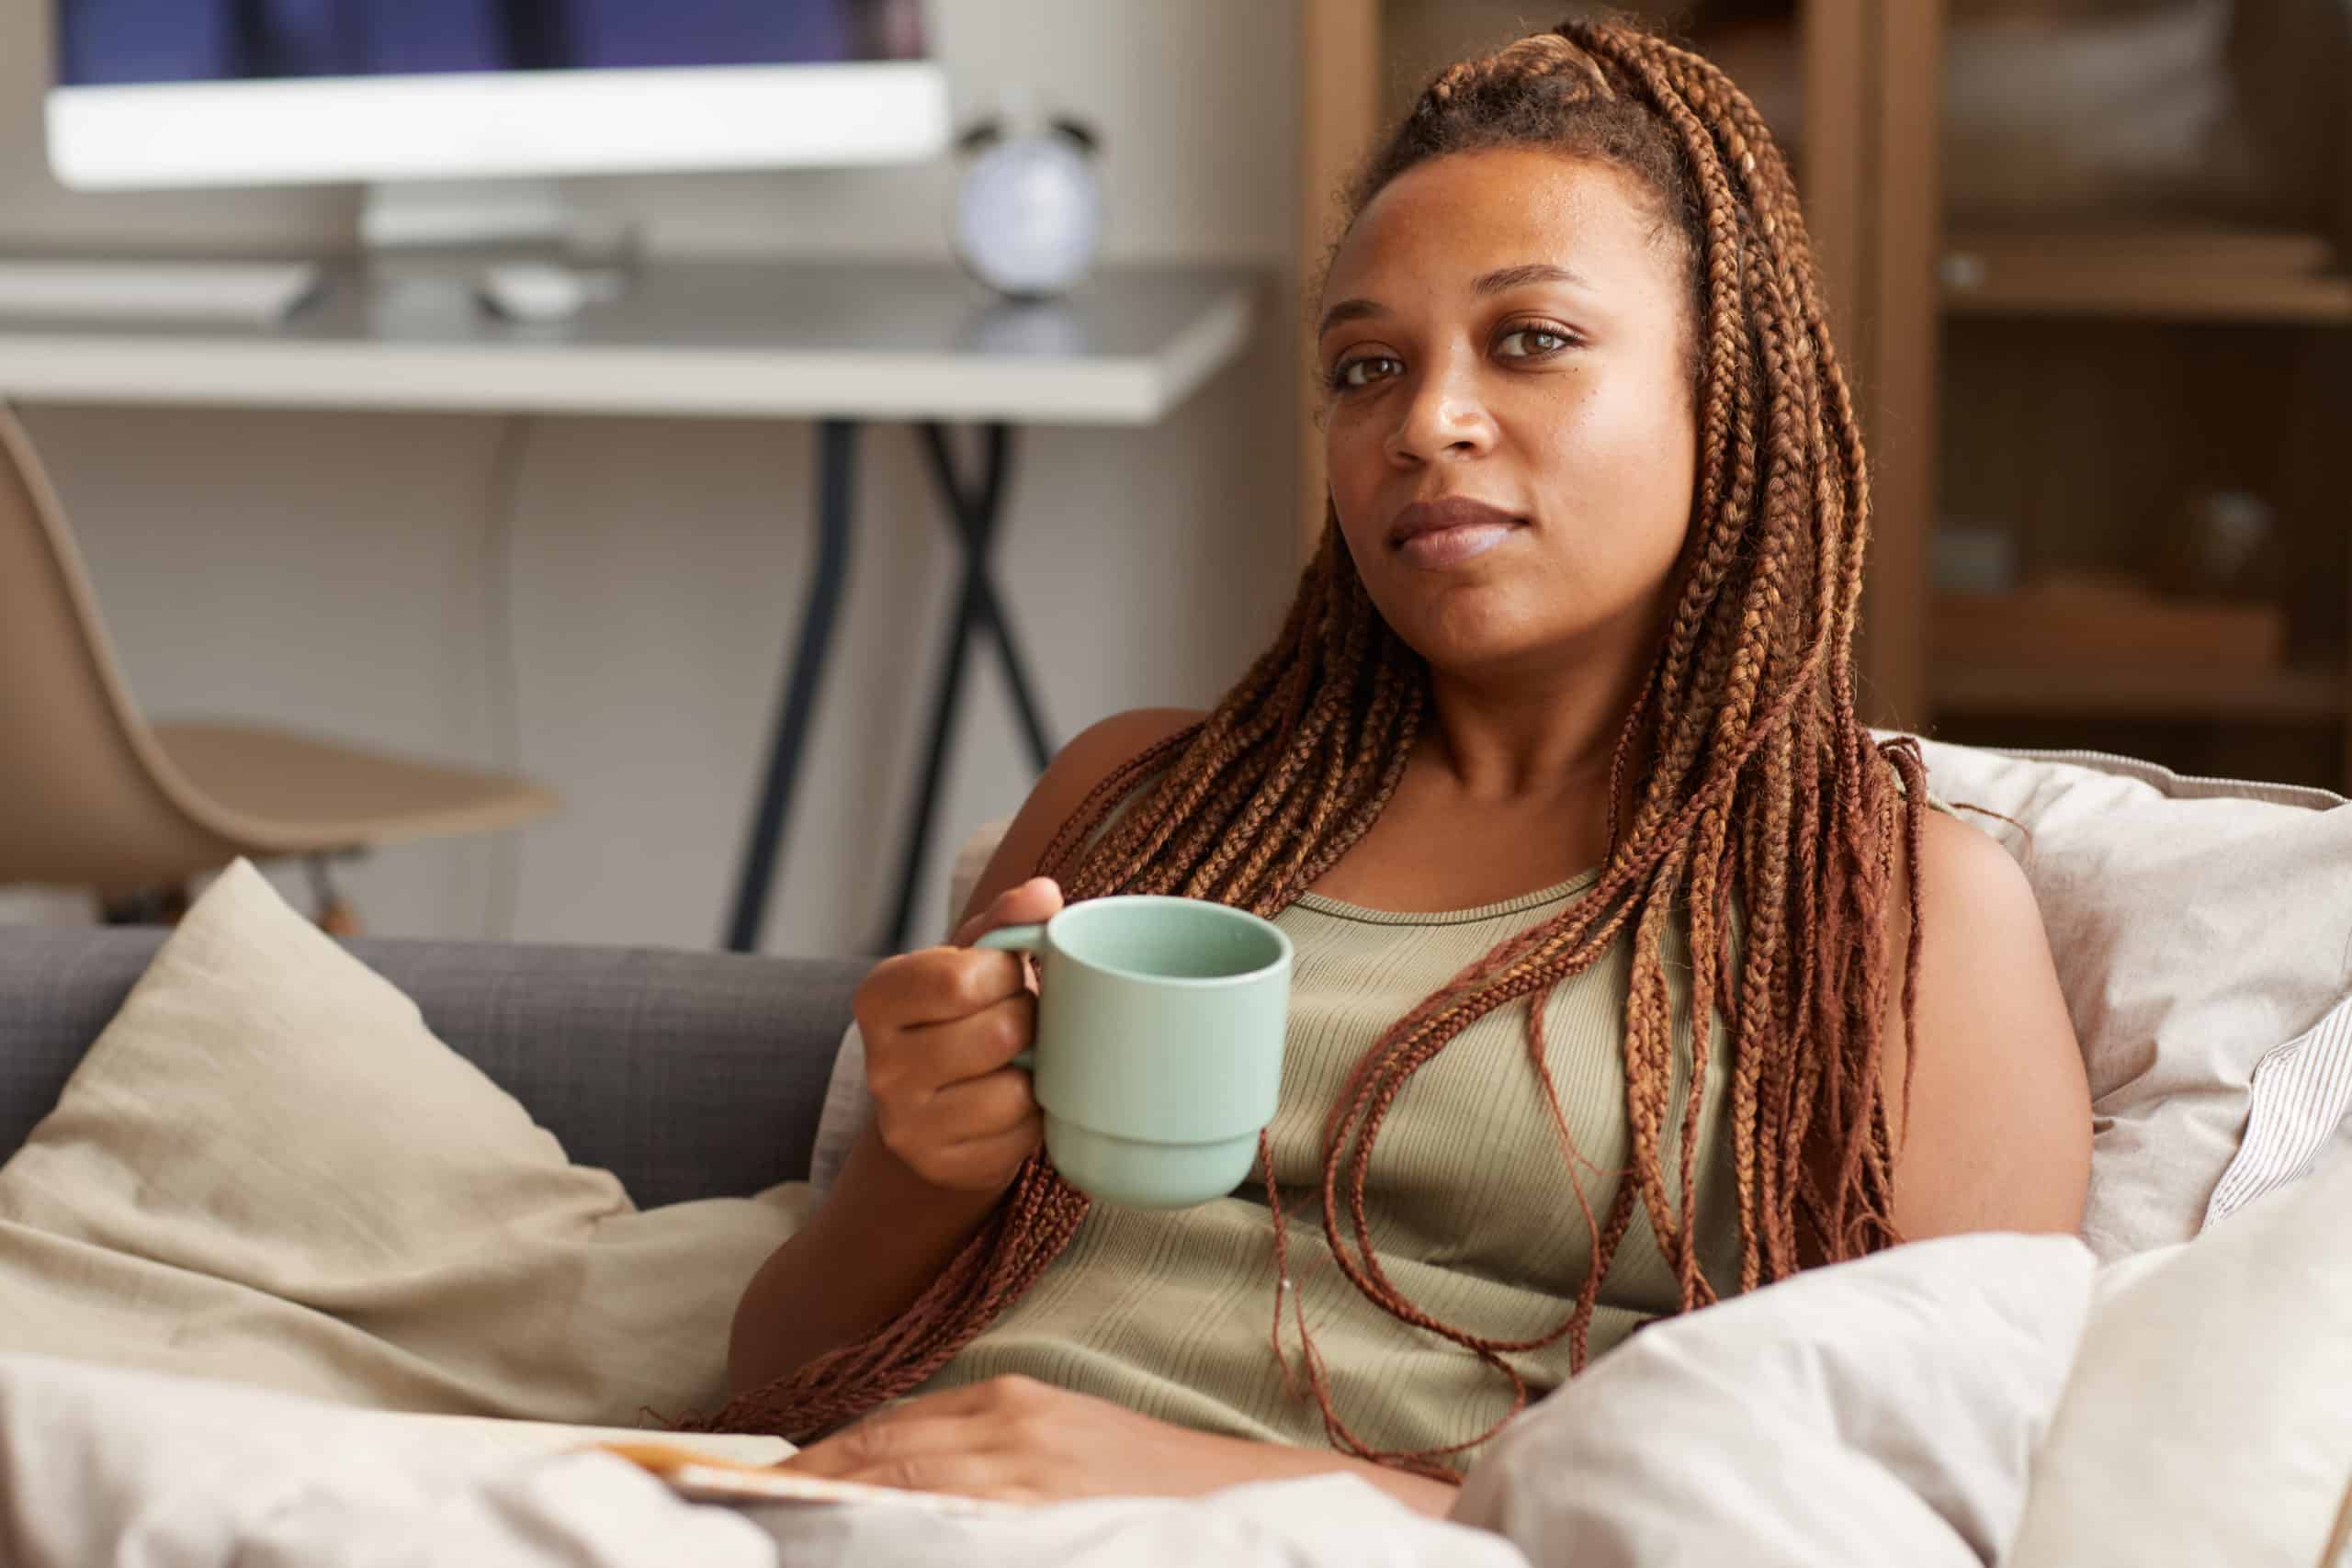 Woman sitting on a couch with a green coffee mug